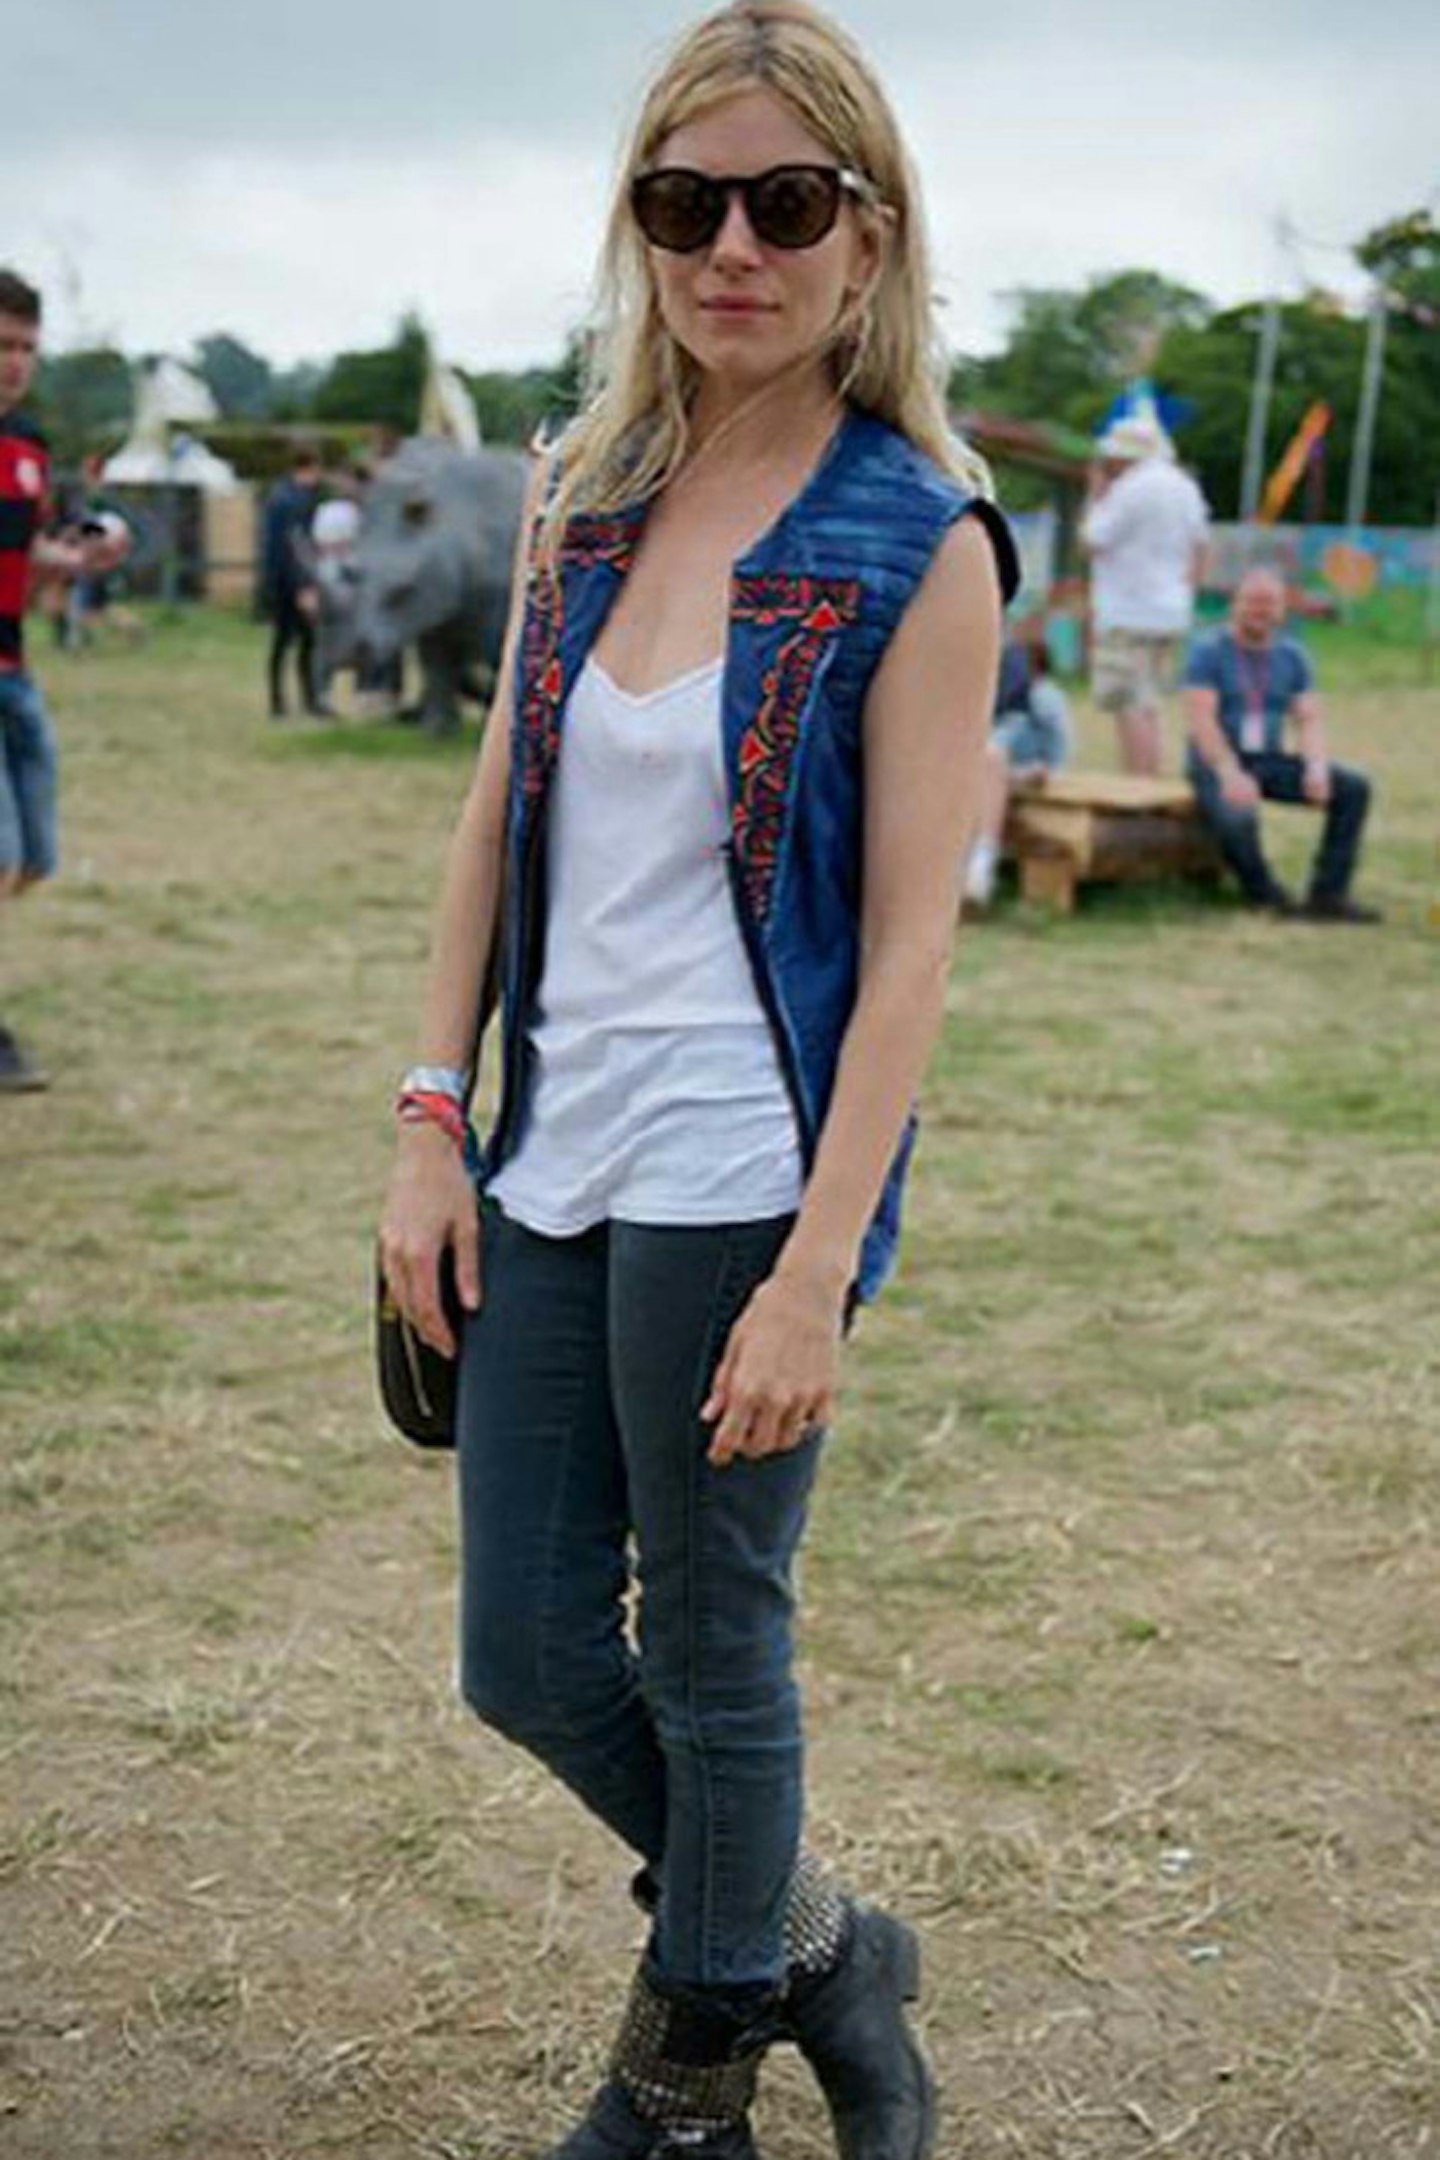 24-Sienna Miller in Topshop dress with a Anya Hindmarch Bathurst bag at Glastonbury - 29 June 2013